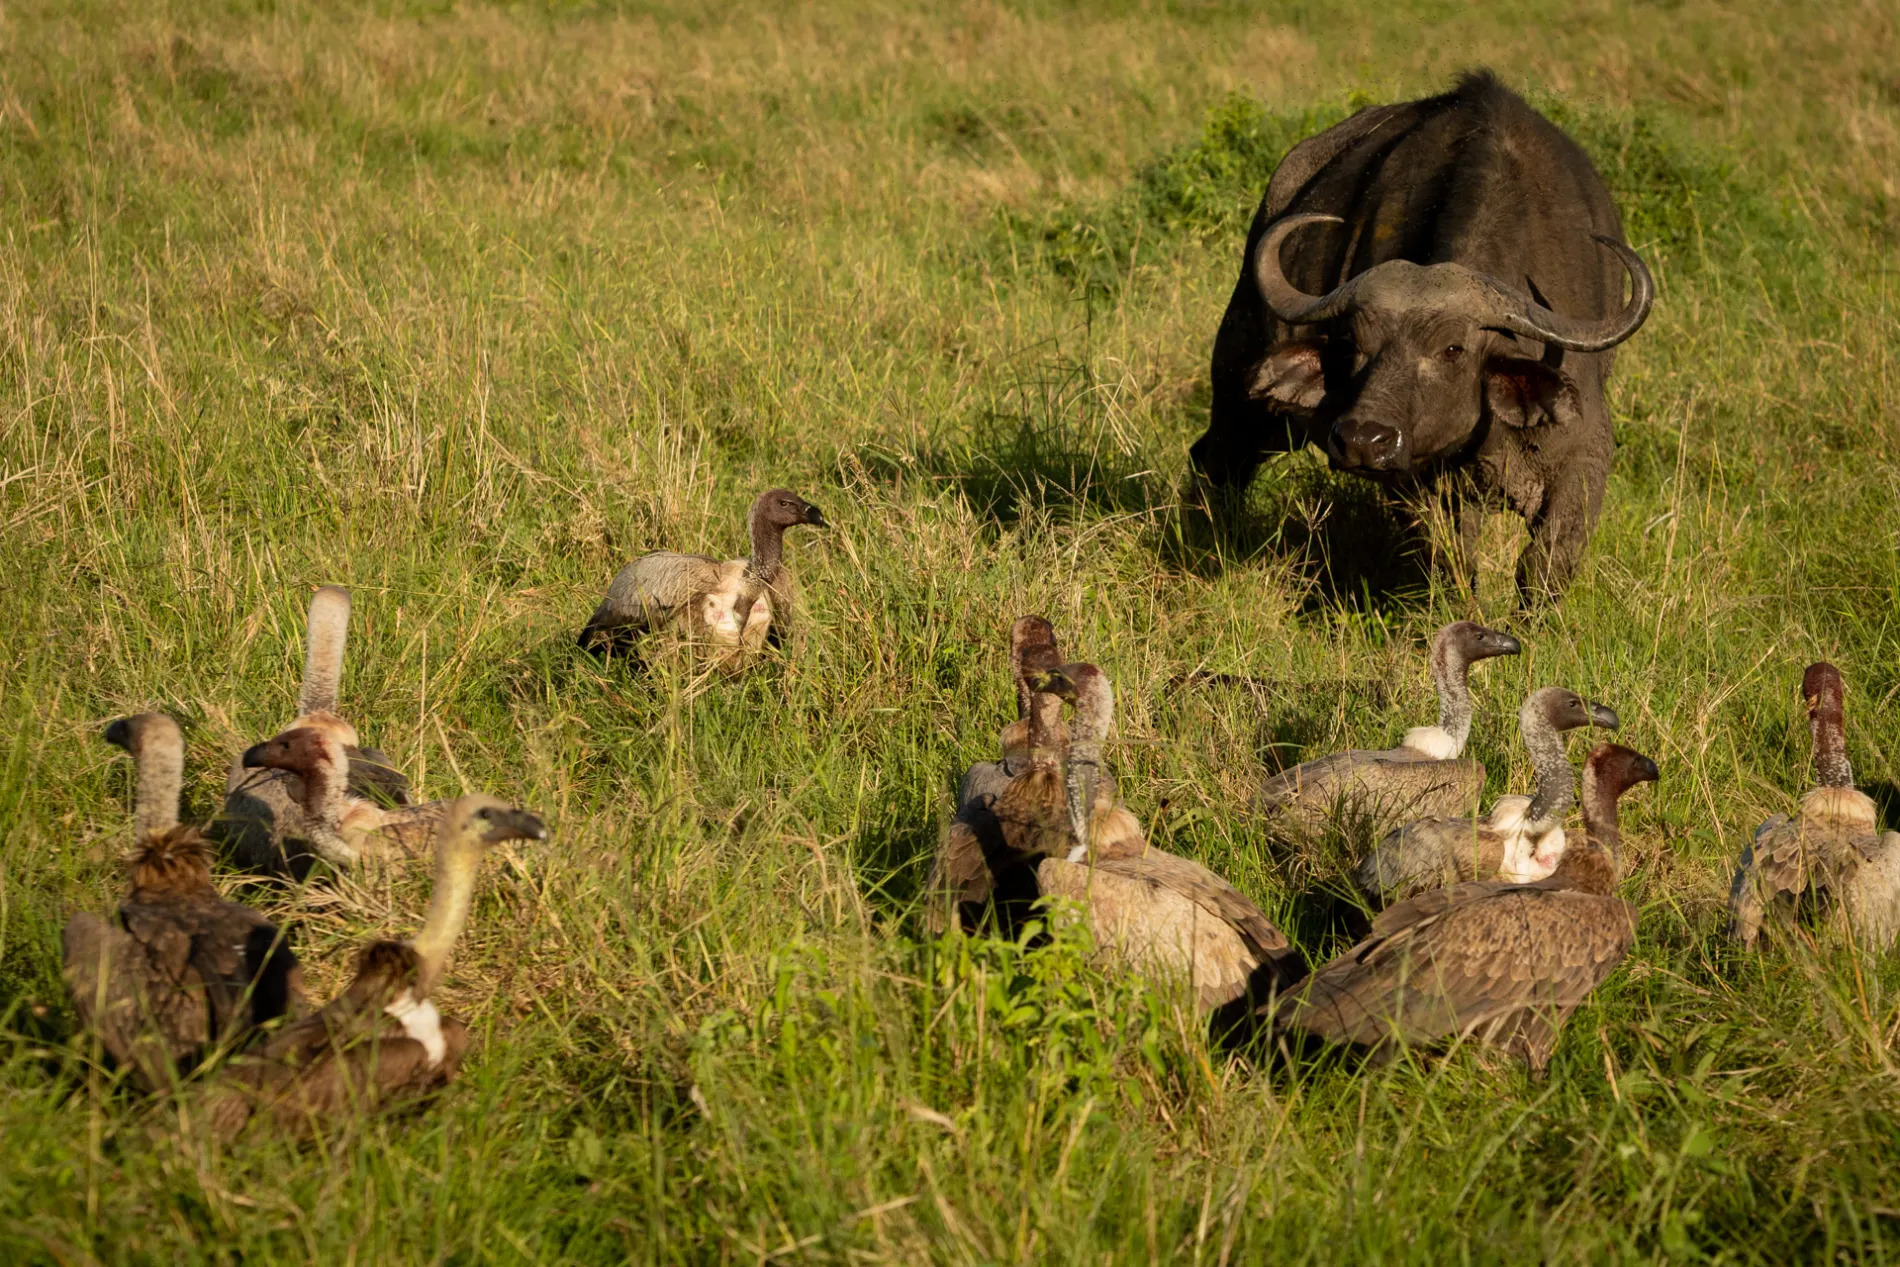 Buffalo and vultures